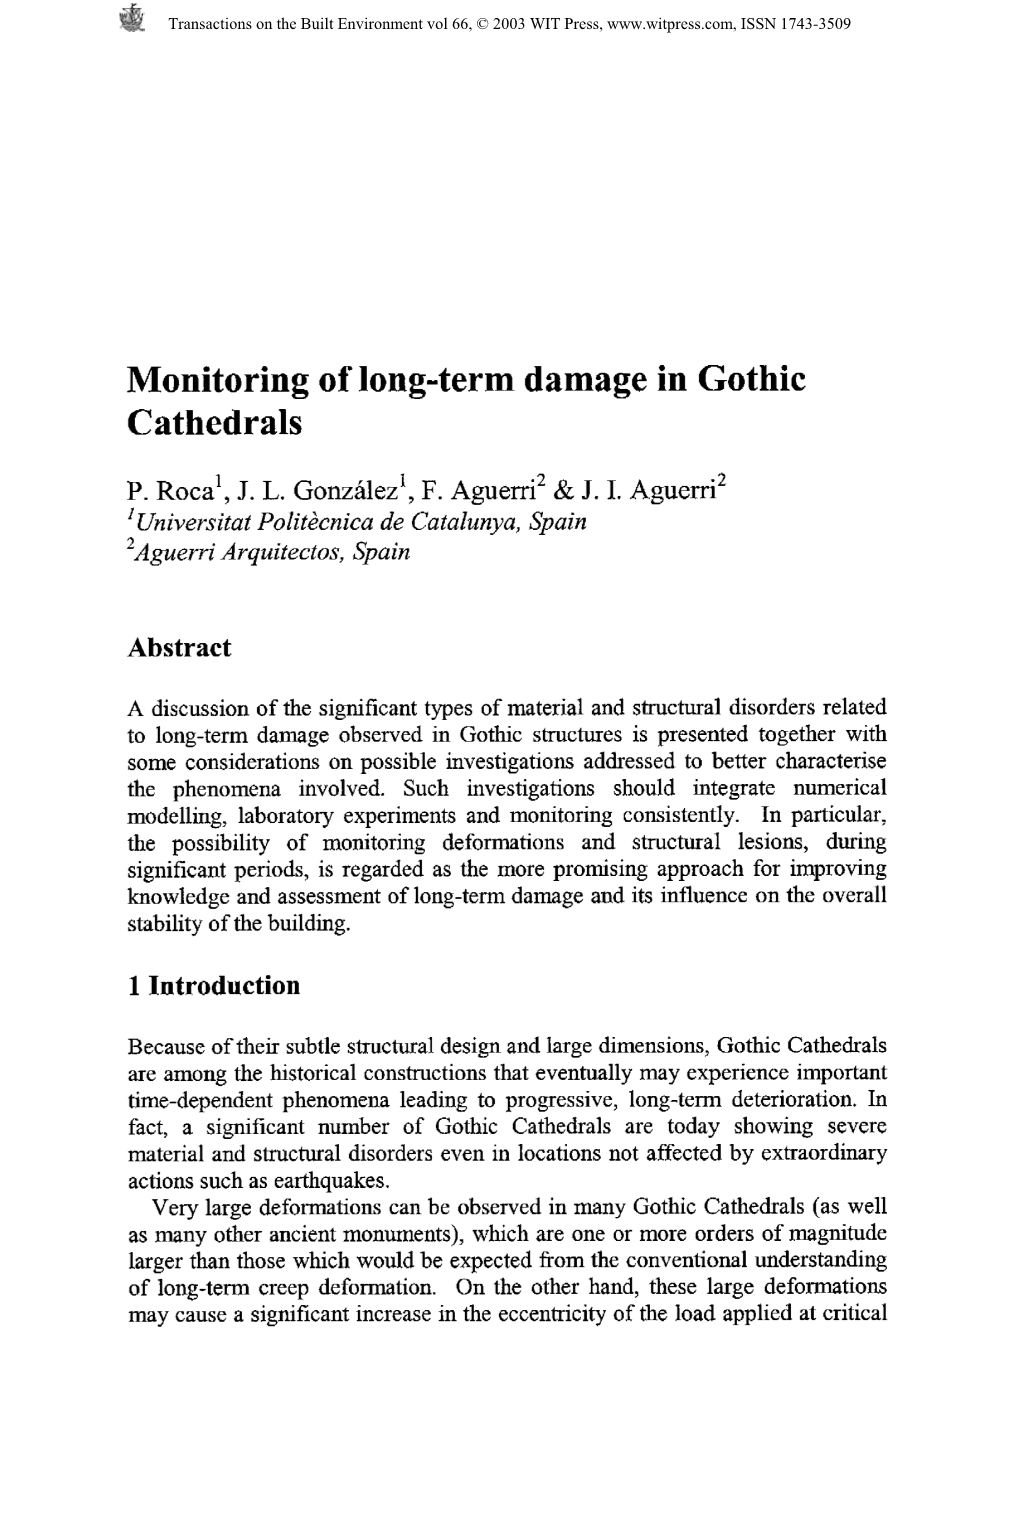 Monitoring of Long-Term Damage in Gothic Cathedrals